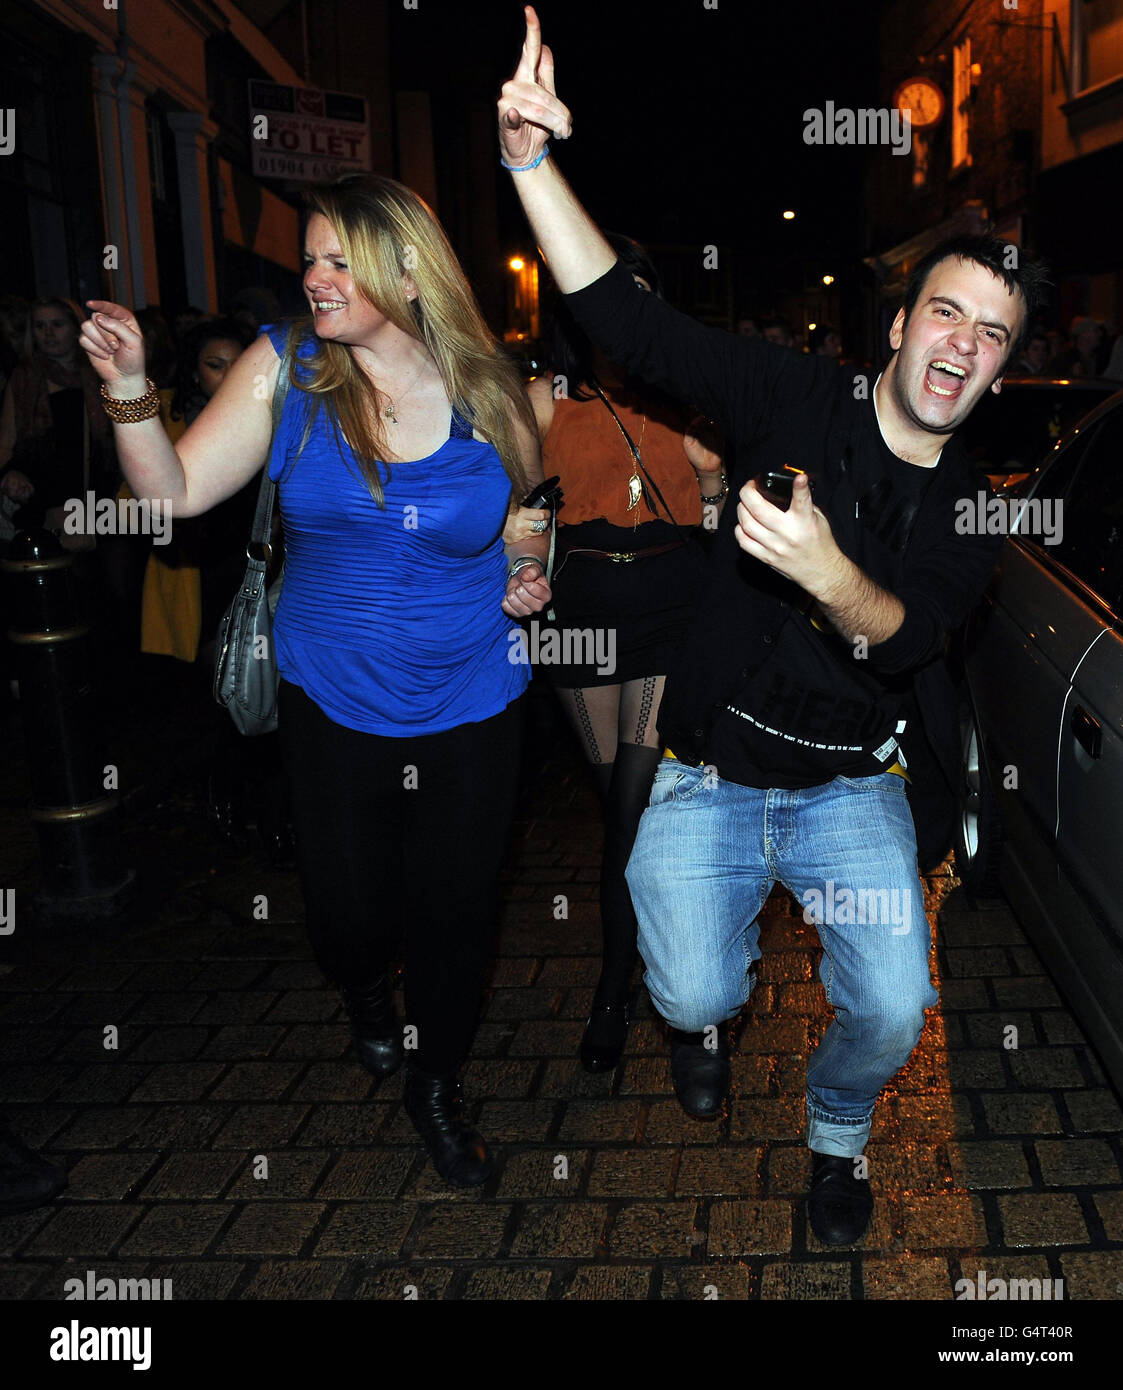 Revellers celebrate the start of the new year in York city centre. Stock Photo